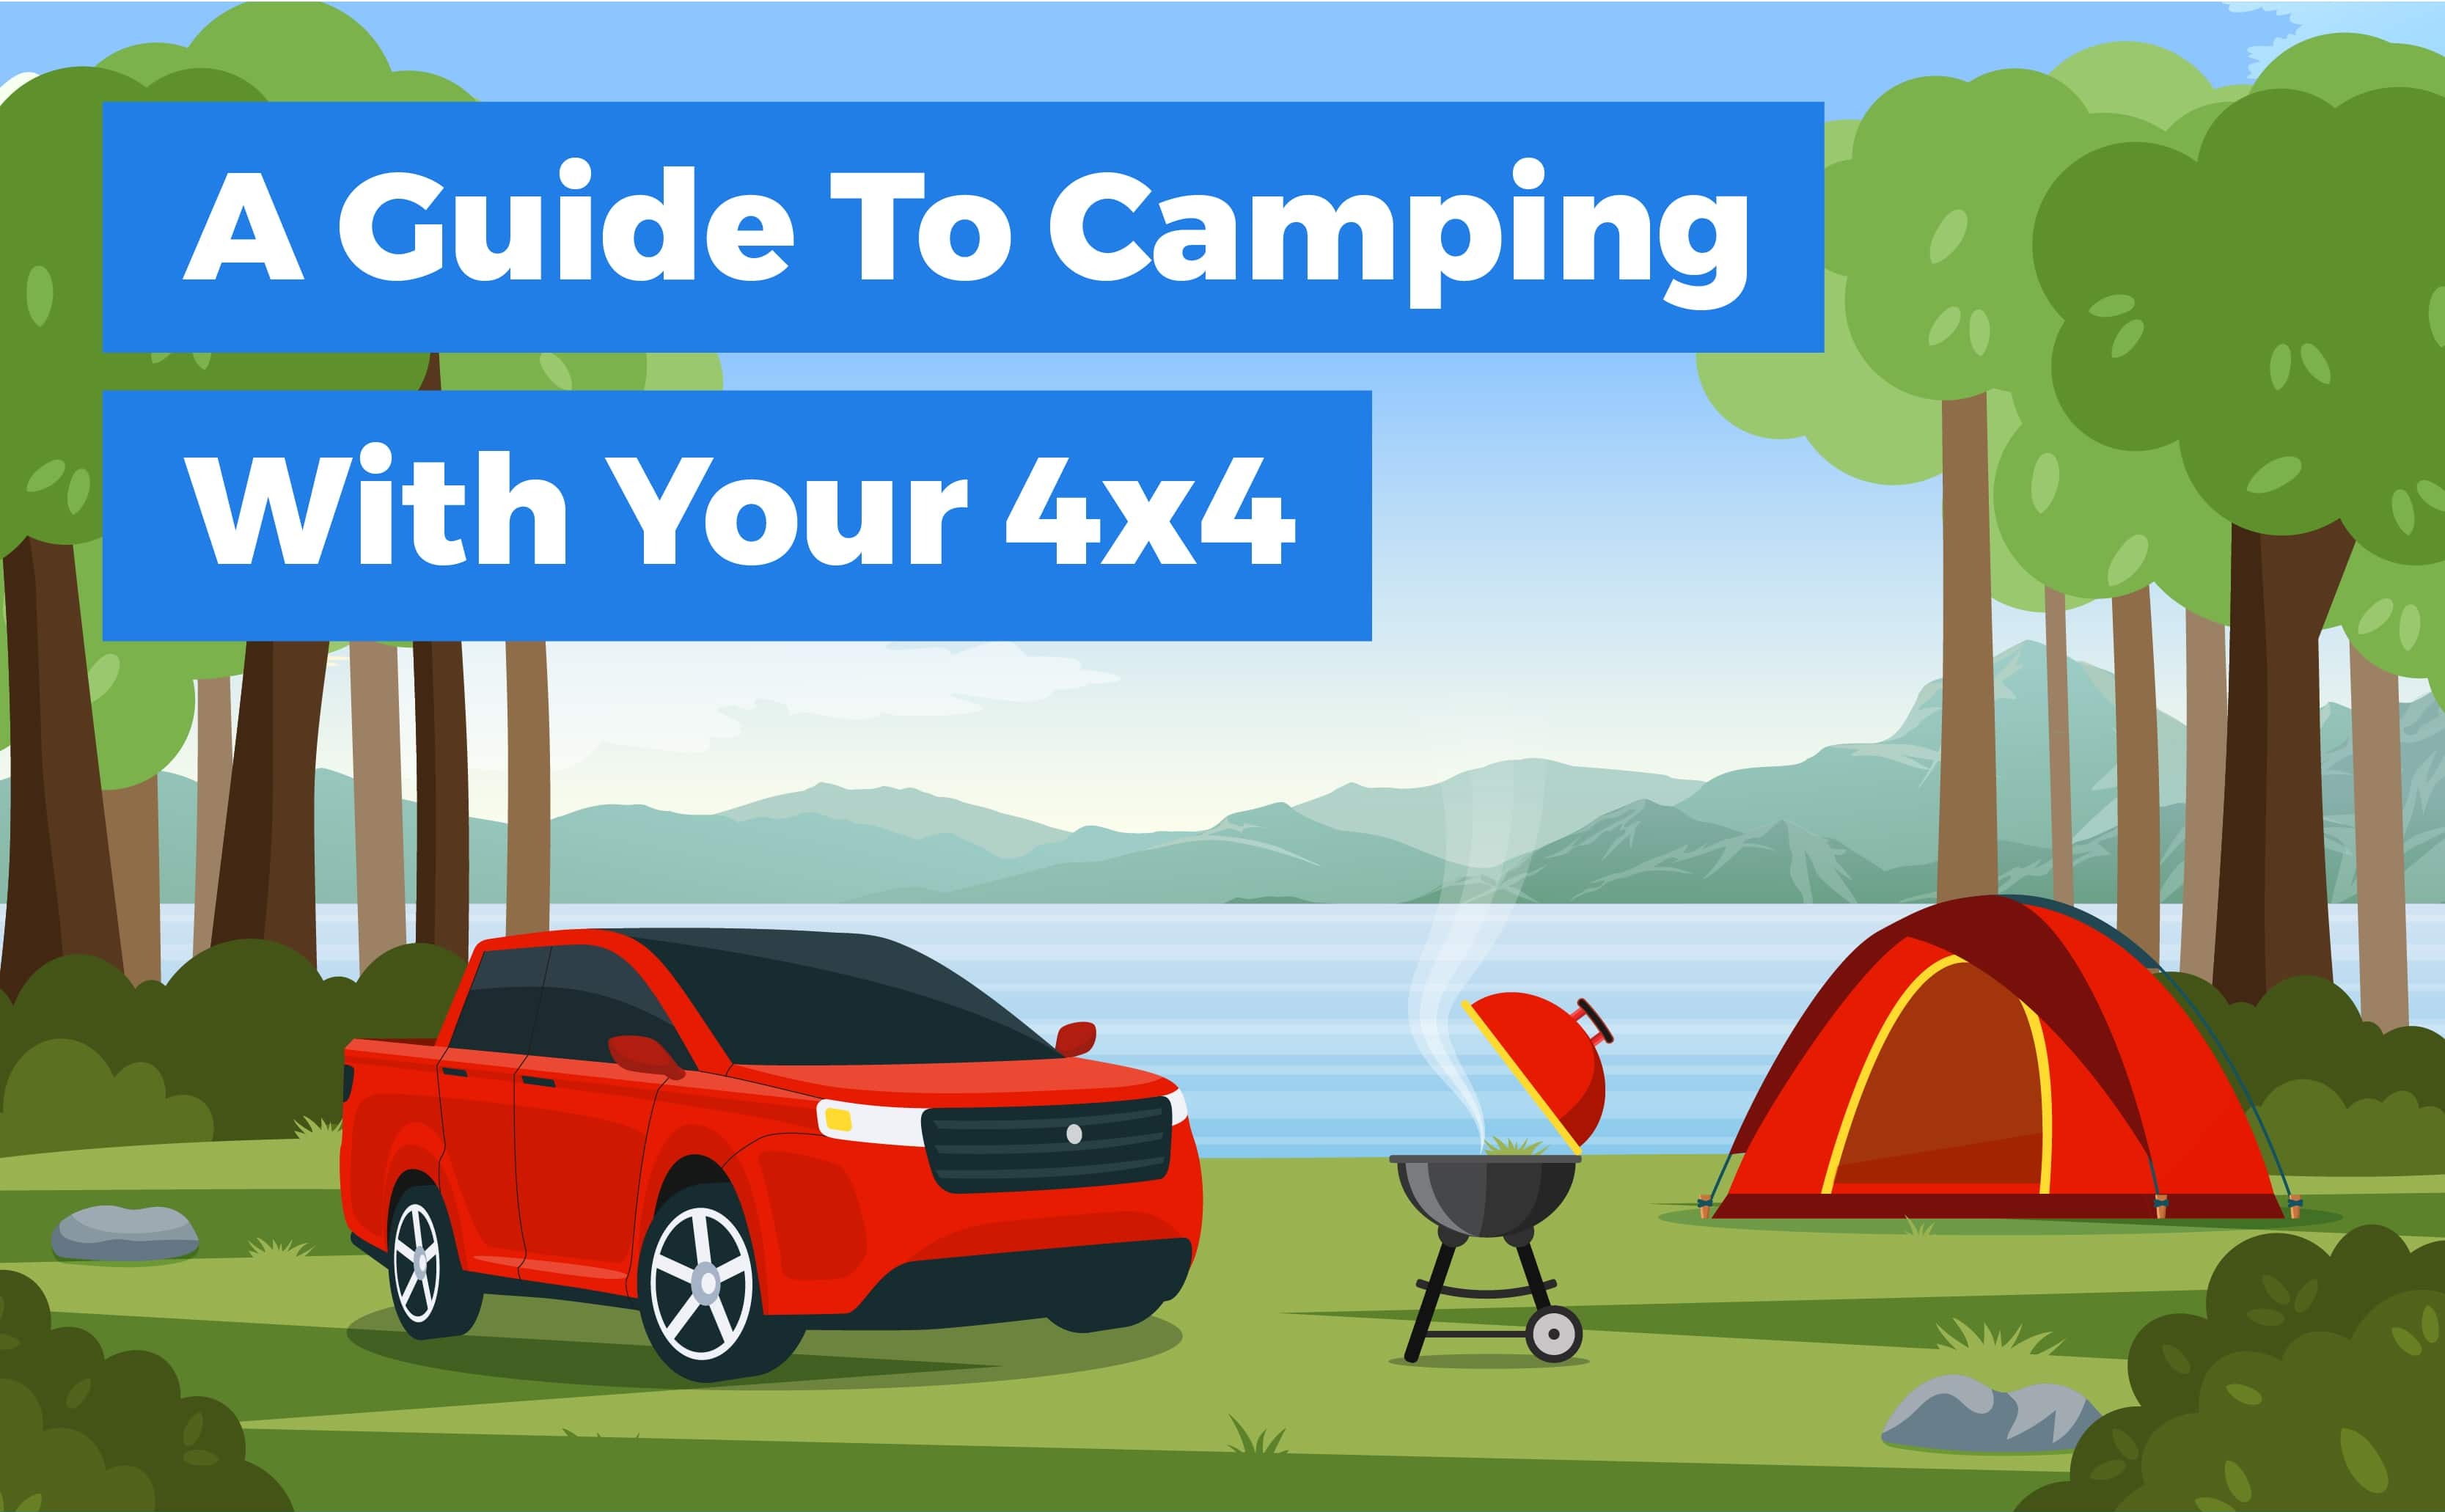 A Guide To Camping With Your 4x4